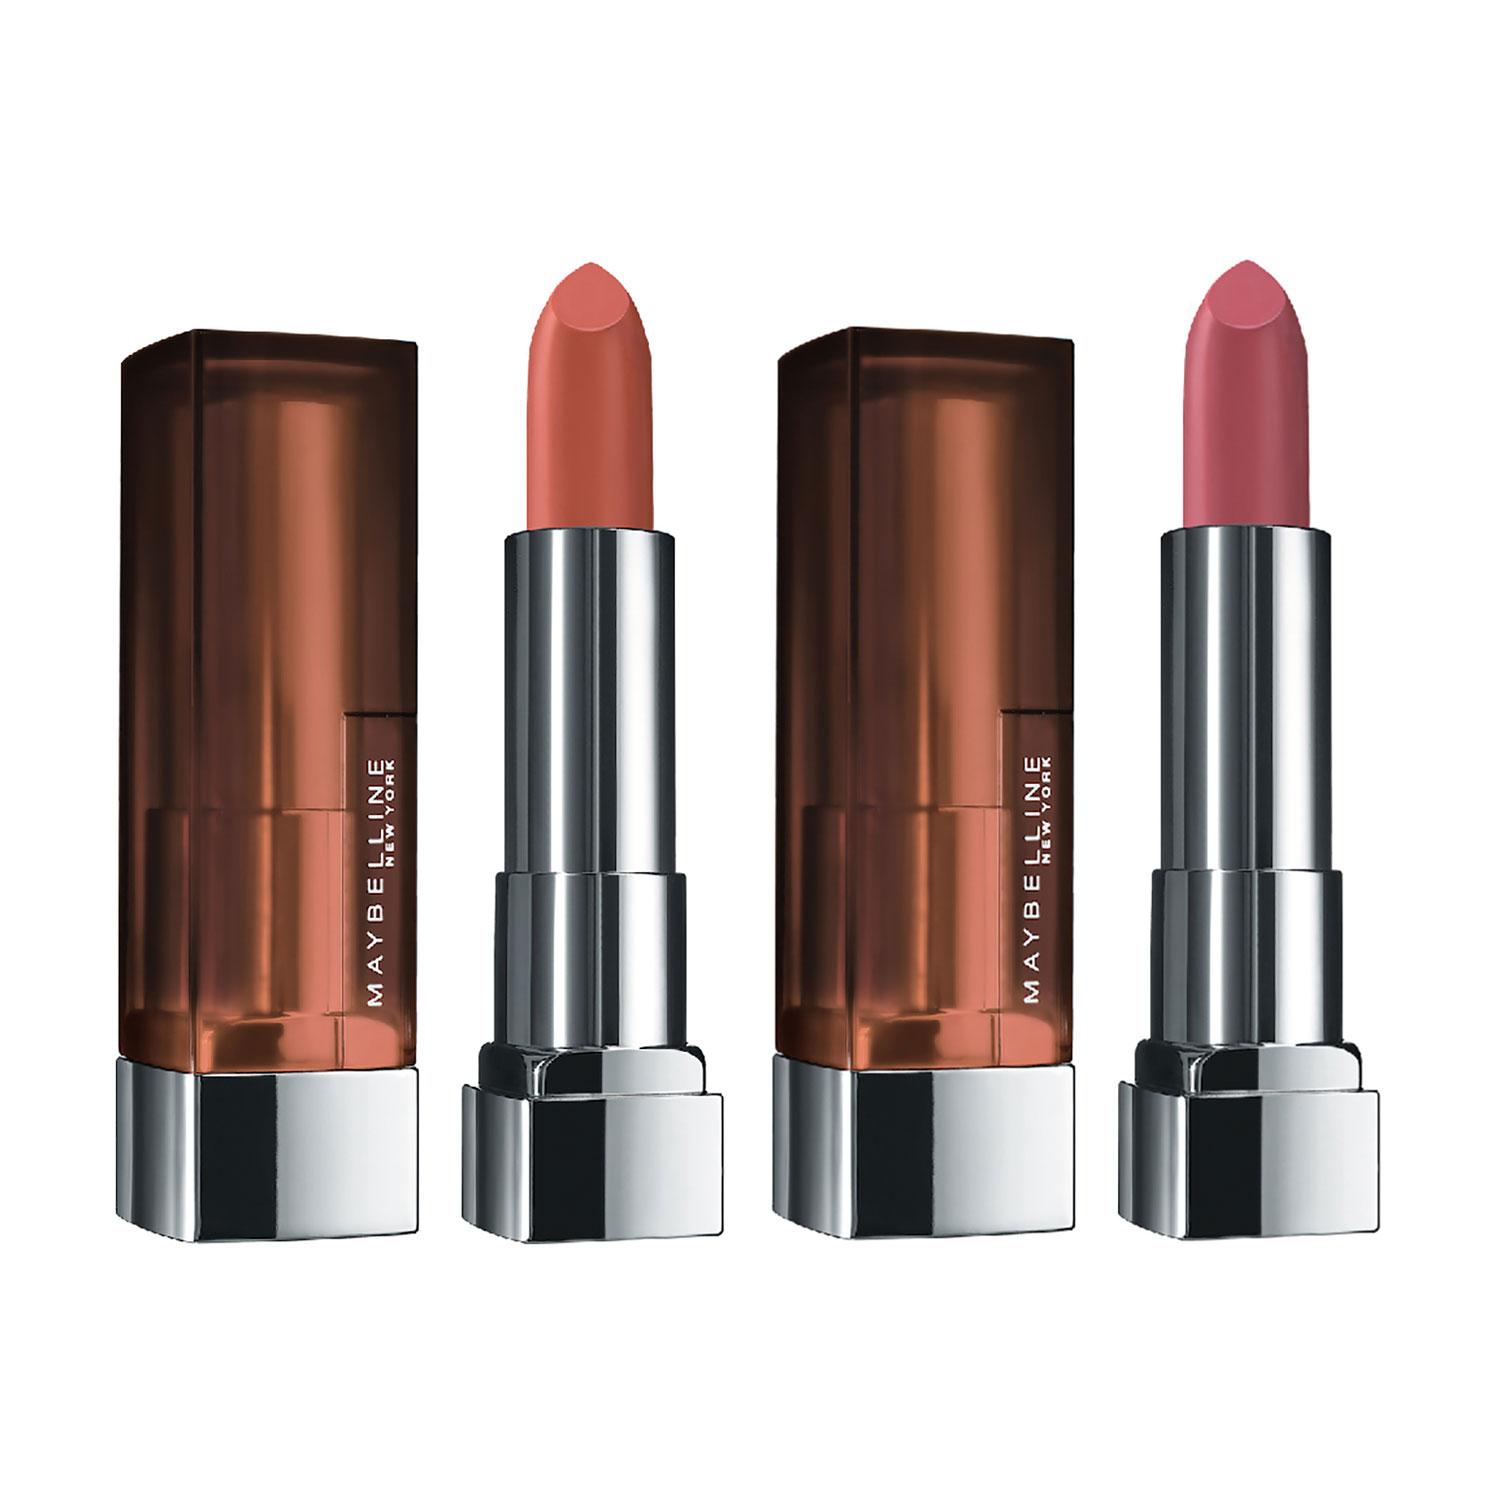 Maybelline New York | Maybelline New York Color Sensational Creamy Matte Lipstick Pack of 2 (Shades 657 & 660)